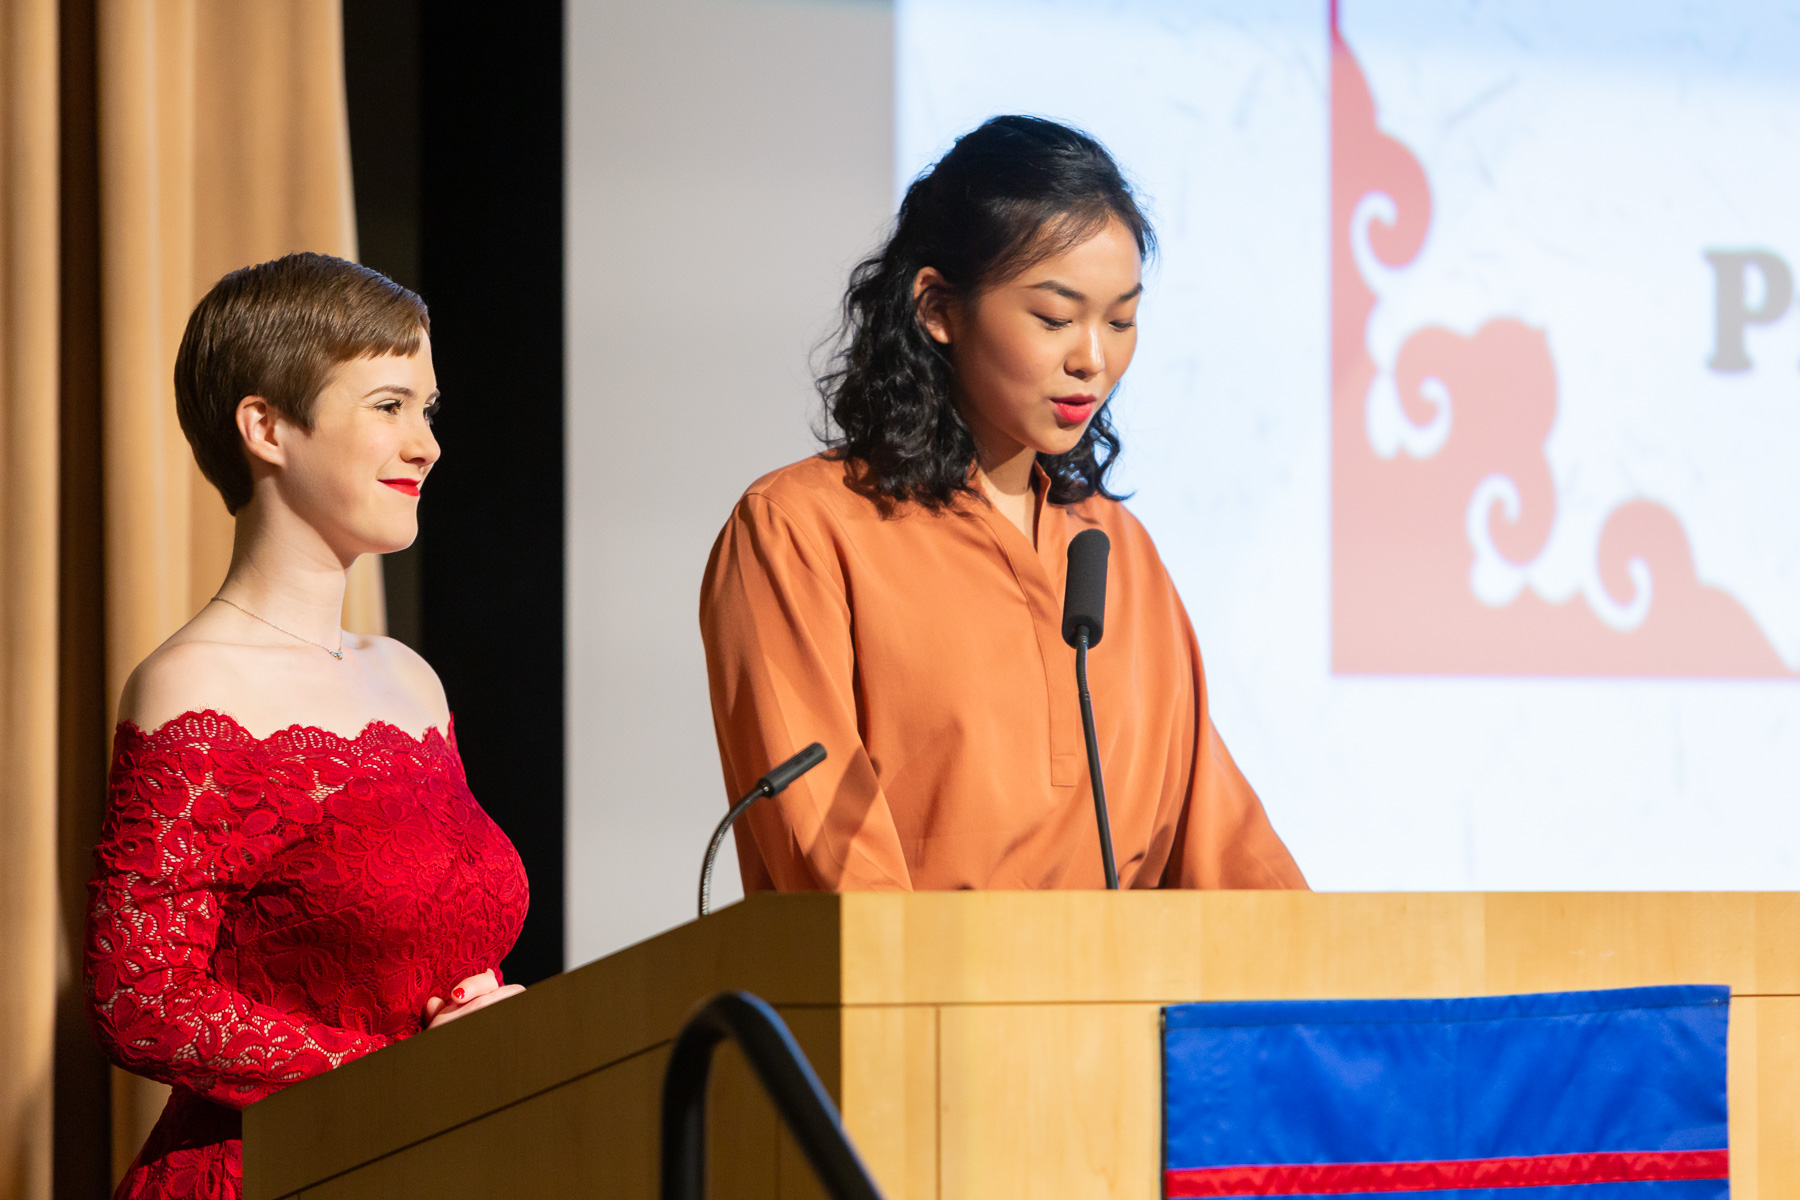 Amanda Stocchetti, president of the DePaul Chinese Studies Association, left, and Yi (Joy) Fang, president of the DePaul Chinese Students and Scholars Association, welcome guests to the event. (DePaul University/Randall Spriggs)